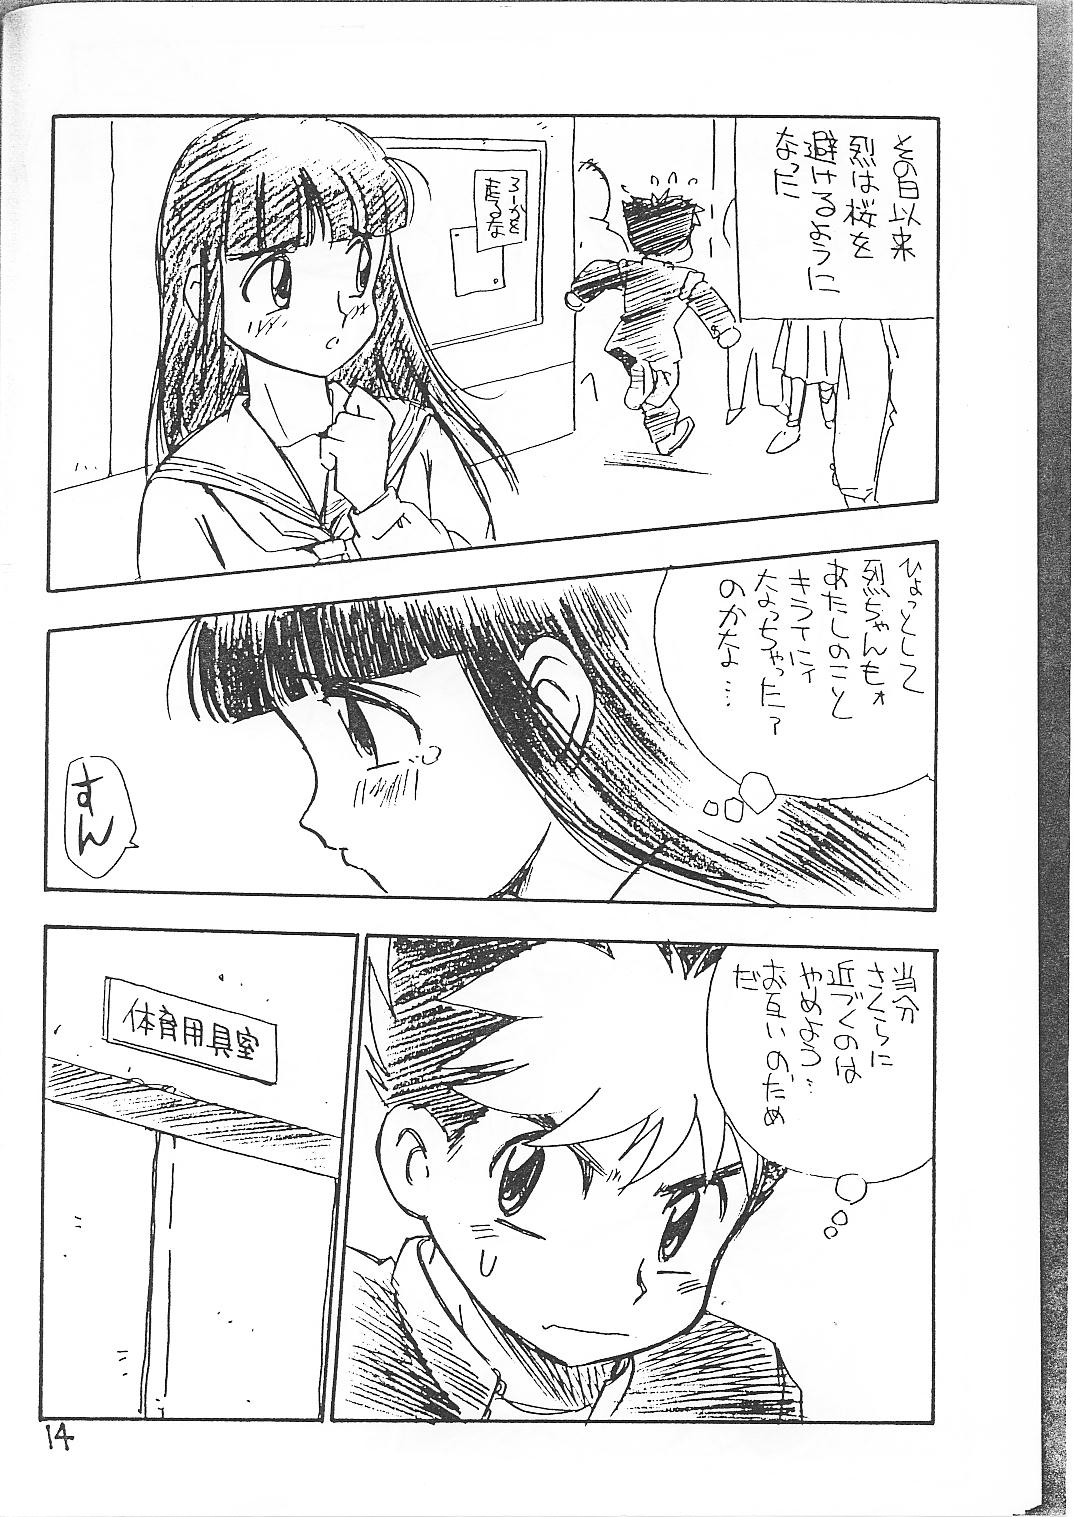 (CR19) [GAME DOME (Kamirenjaku Sanpei)] ANAL ANGEL (Barcode Fighter) page 13 full